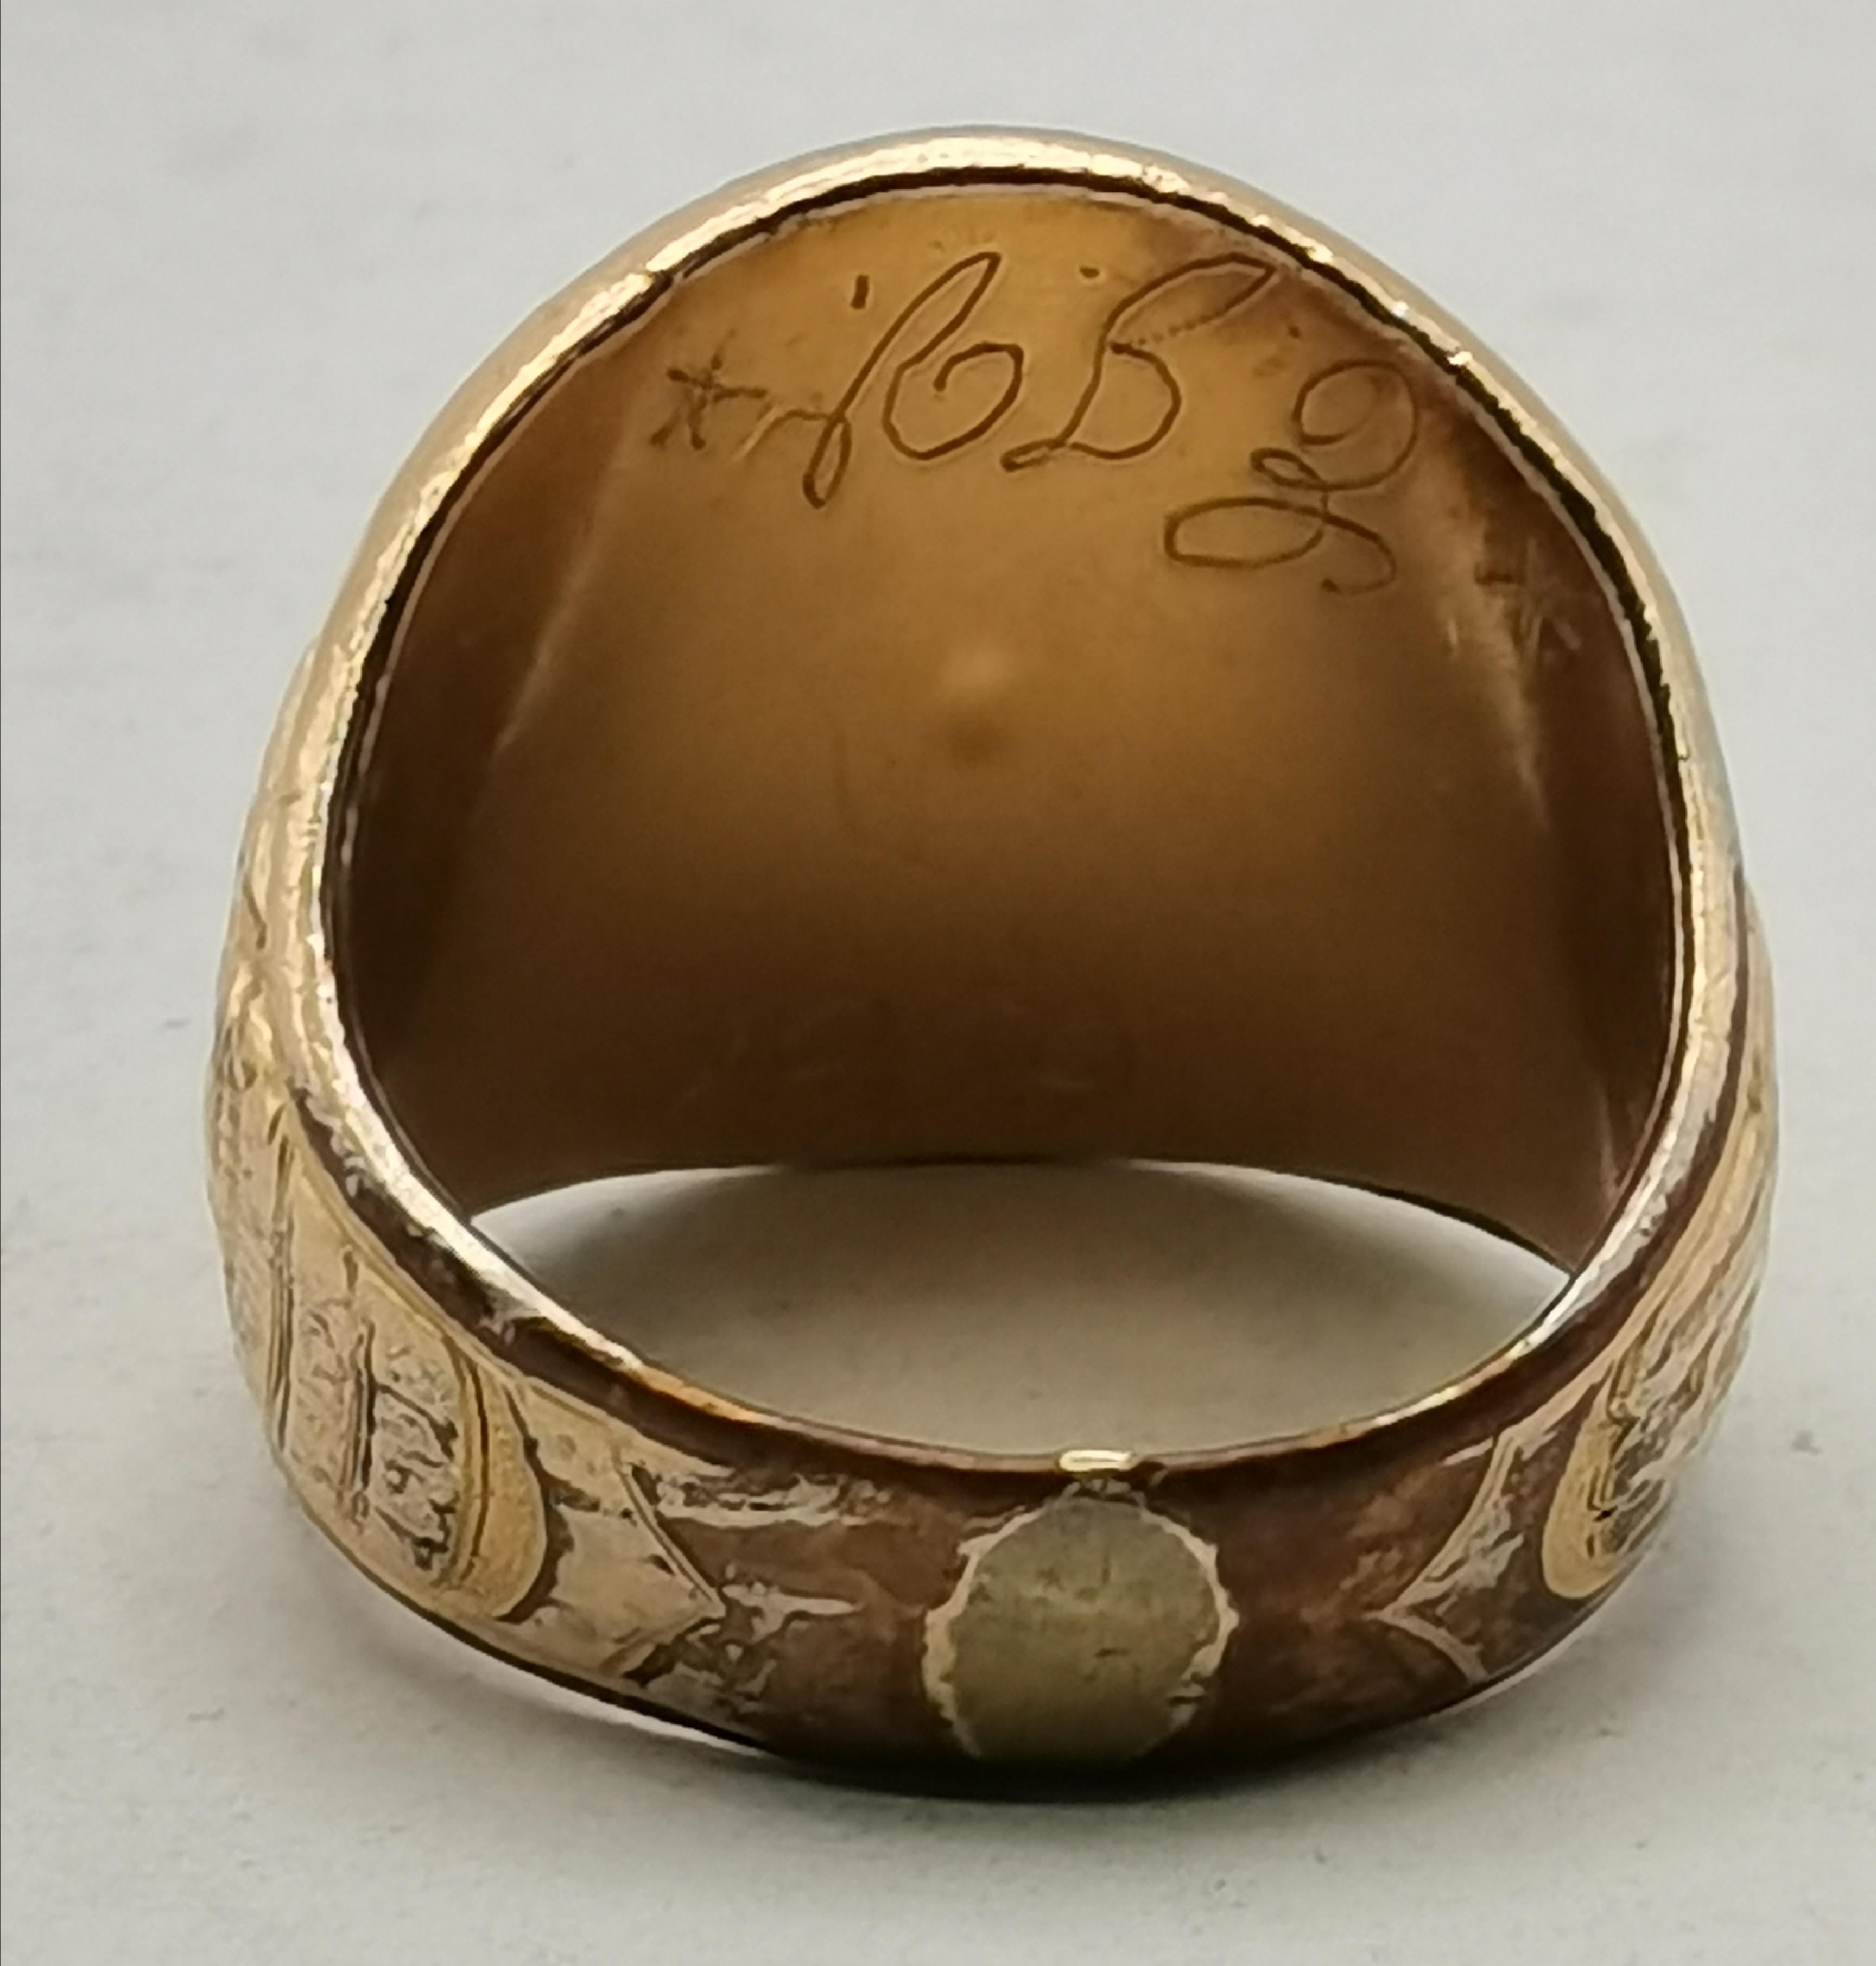 An Elizabeth II silver ingot pendant, and a gold-plated US Navy ring - Image 4 of 4